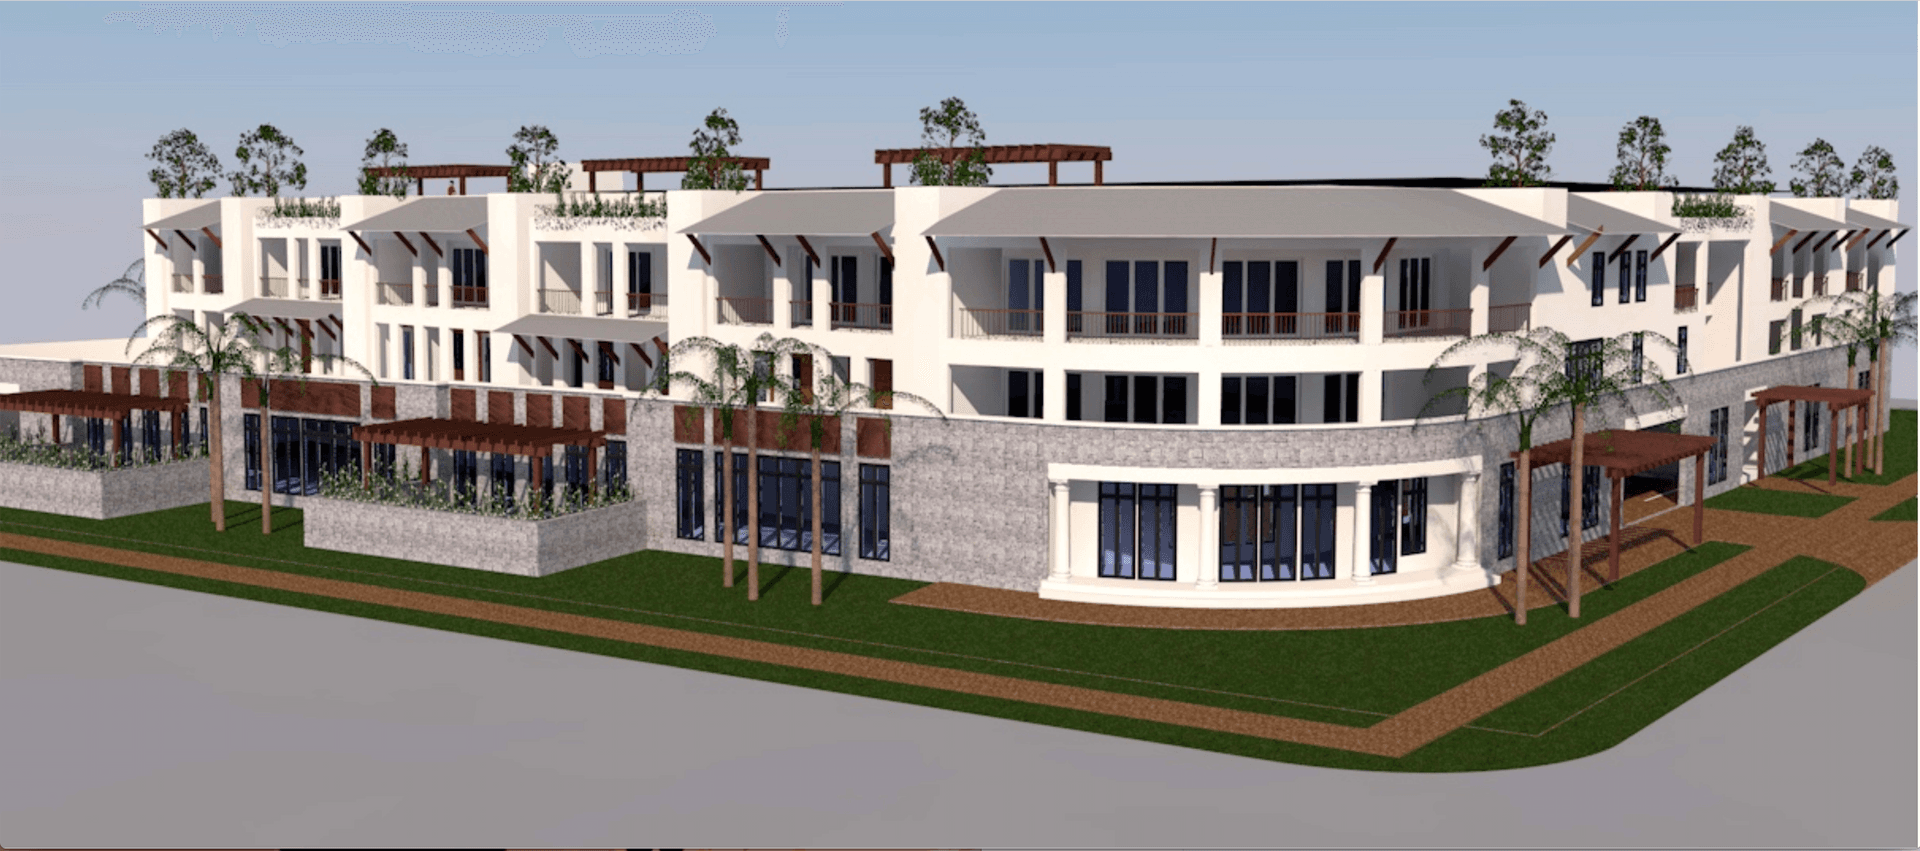 Designers say the new Satellite Beach hotel will have a low carbon footprint, be extremely energy efficient, and be able to withstand the increasingly harsh storms and floods that climate change is bringing to the region.